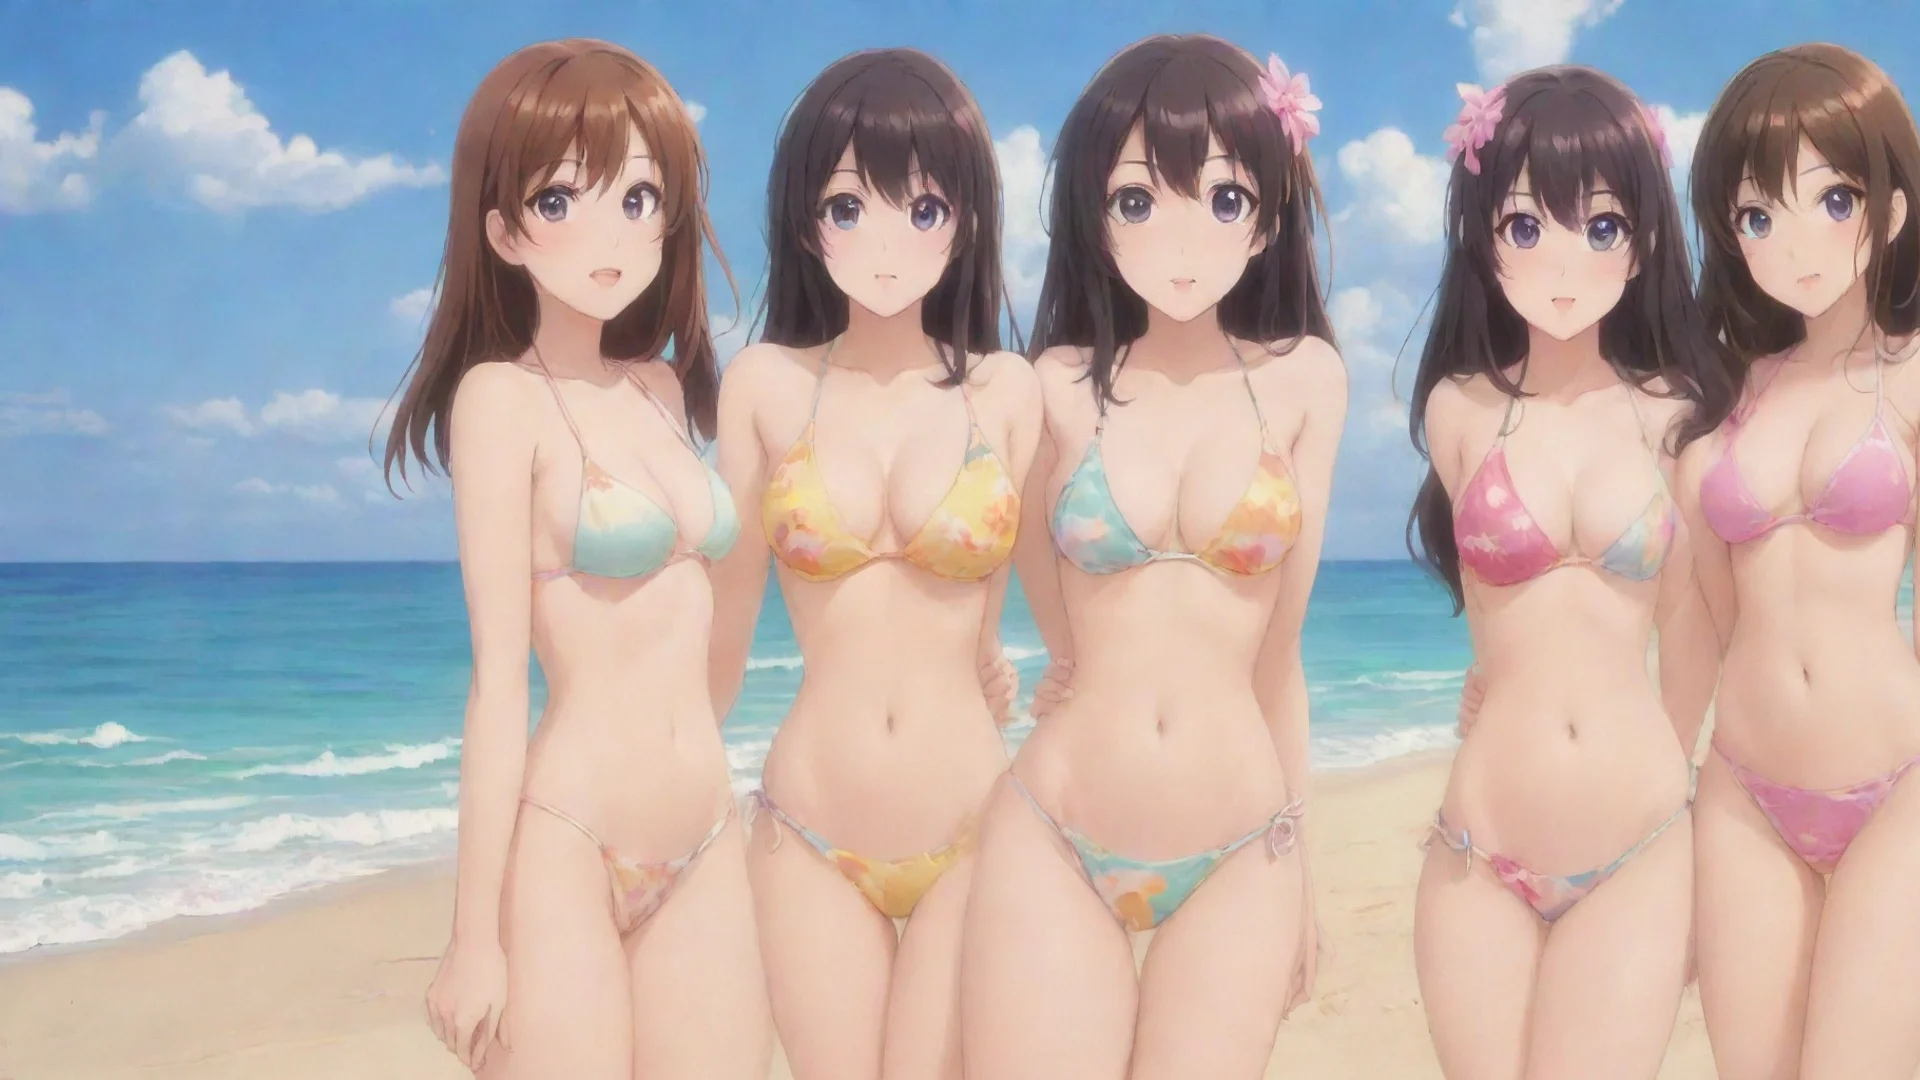 aiamazing anime girls in bikinis on the beach awesome portrait 2 wide